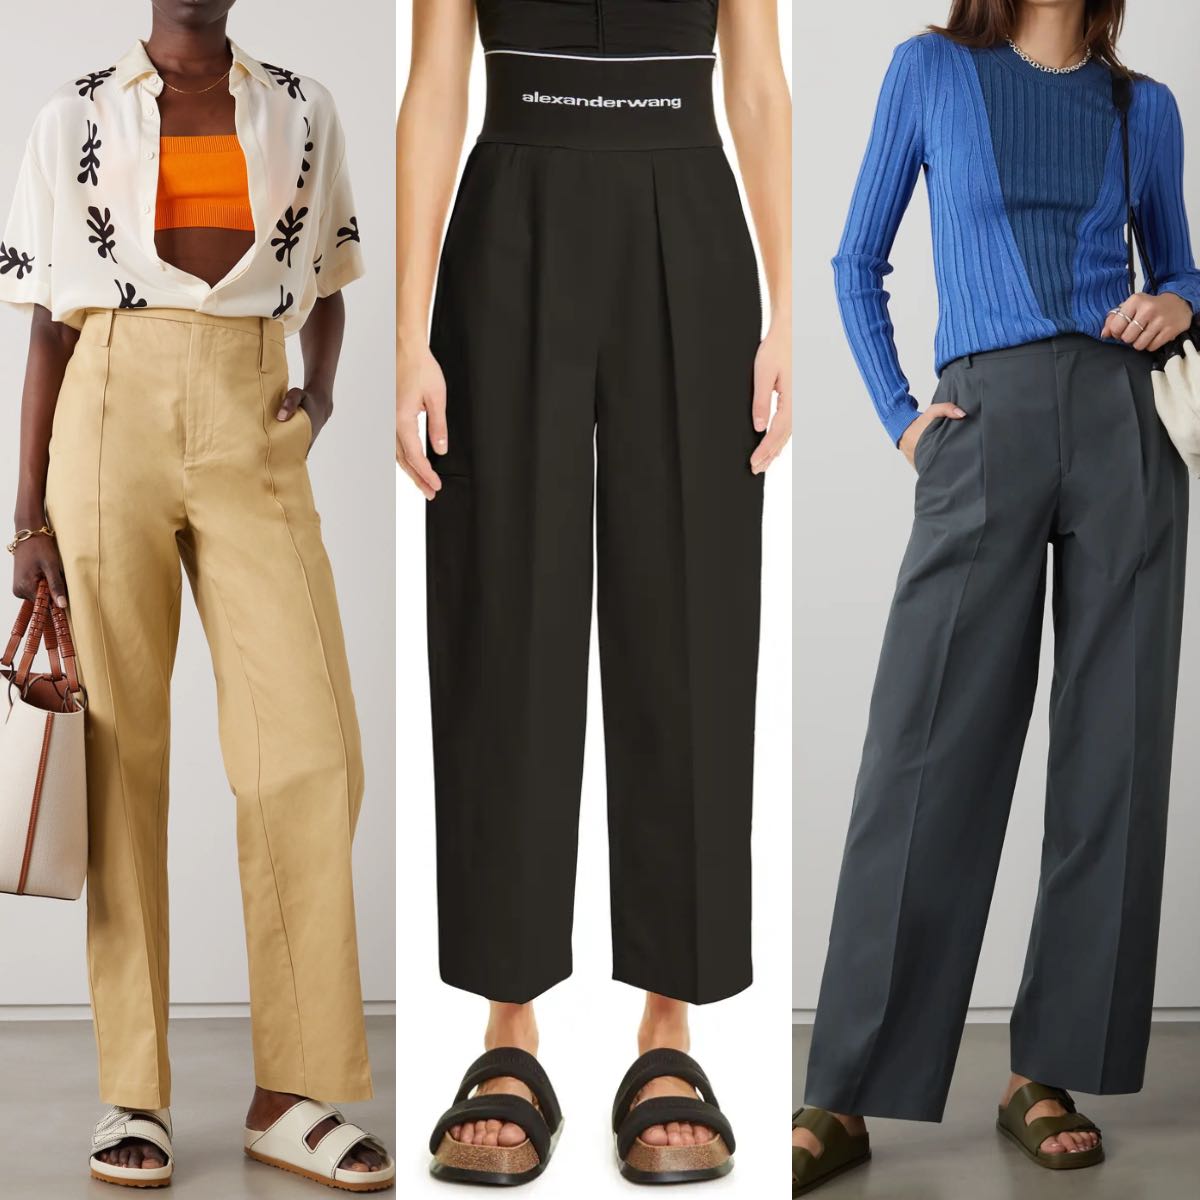 3 women wearing earthy sandals with wide leg pants and trousers.